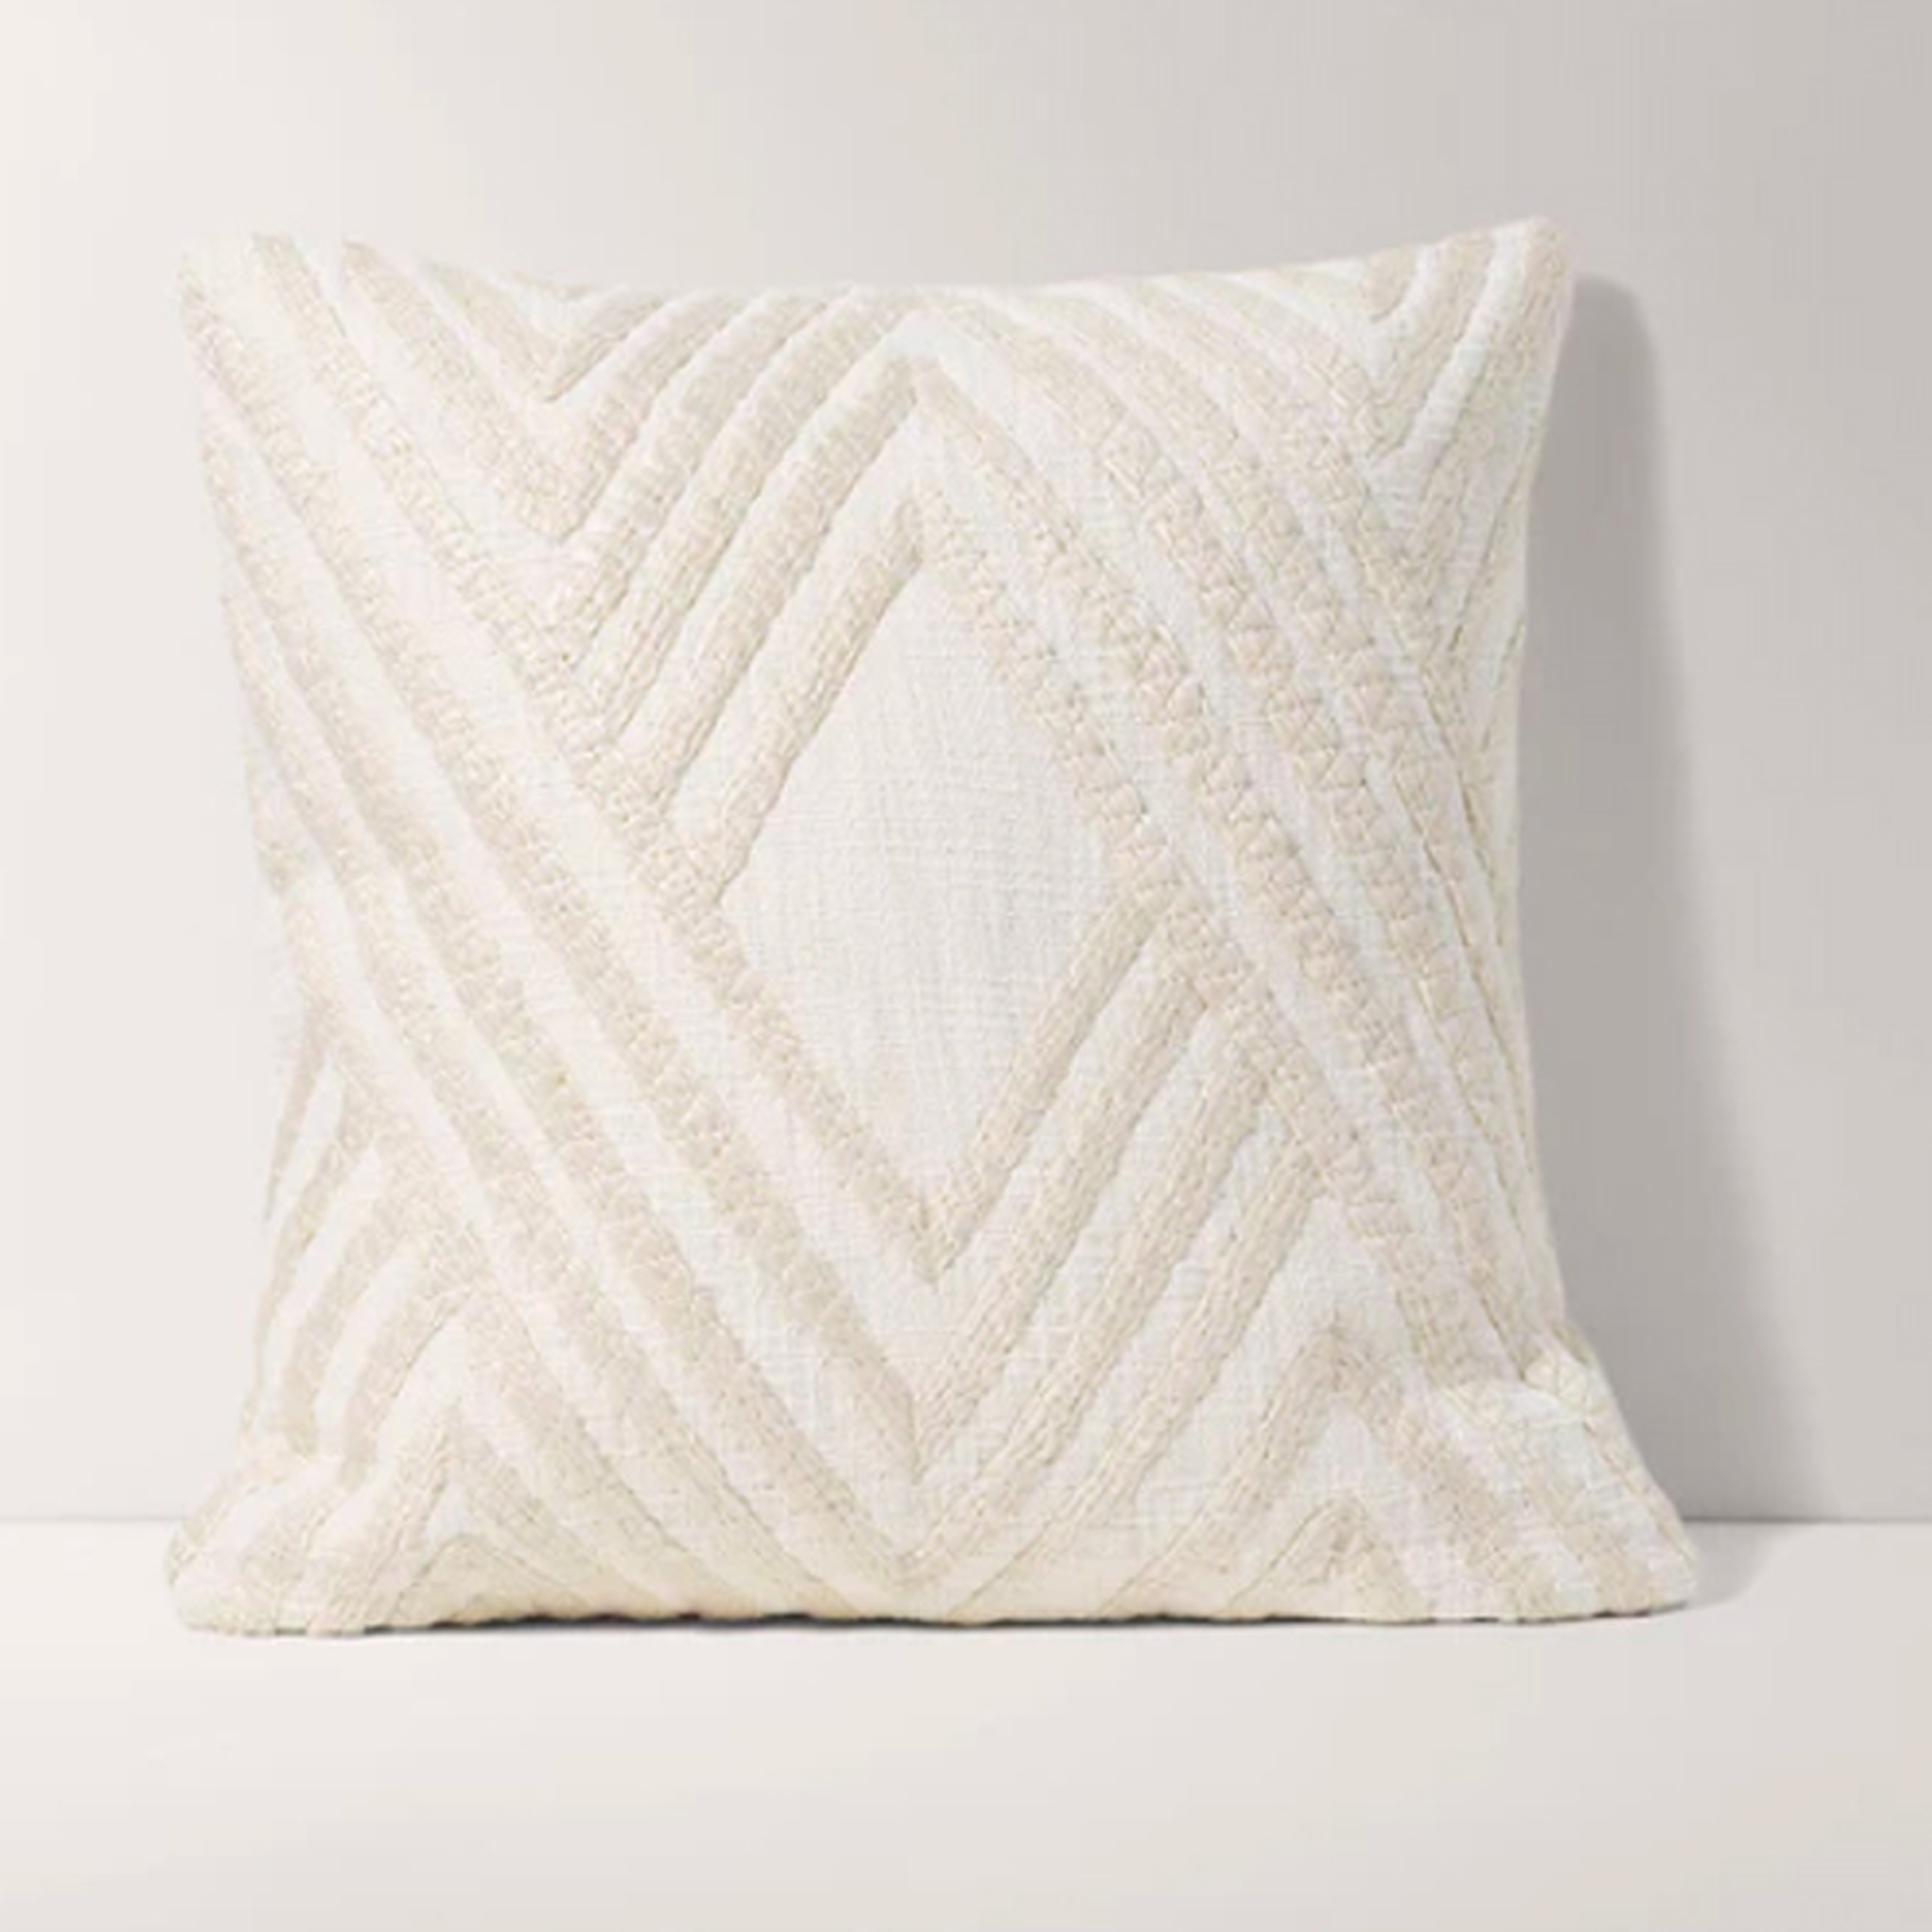 Embroidered Ivory Pillow Cover with Insert - Burrow